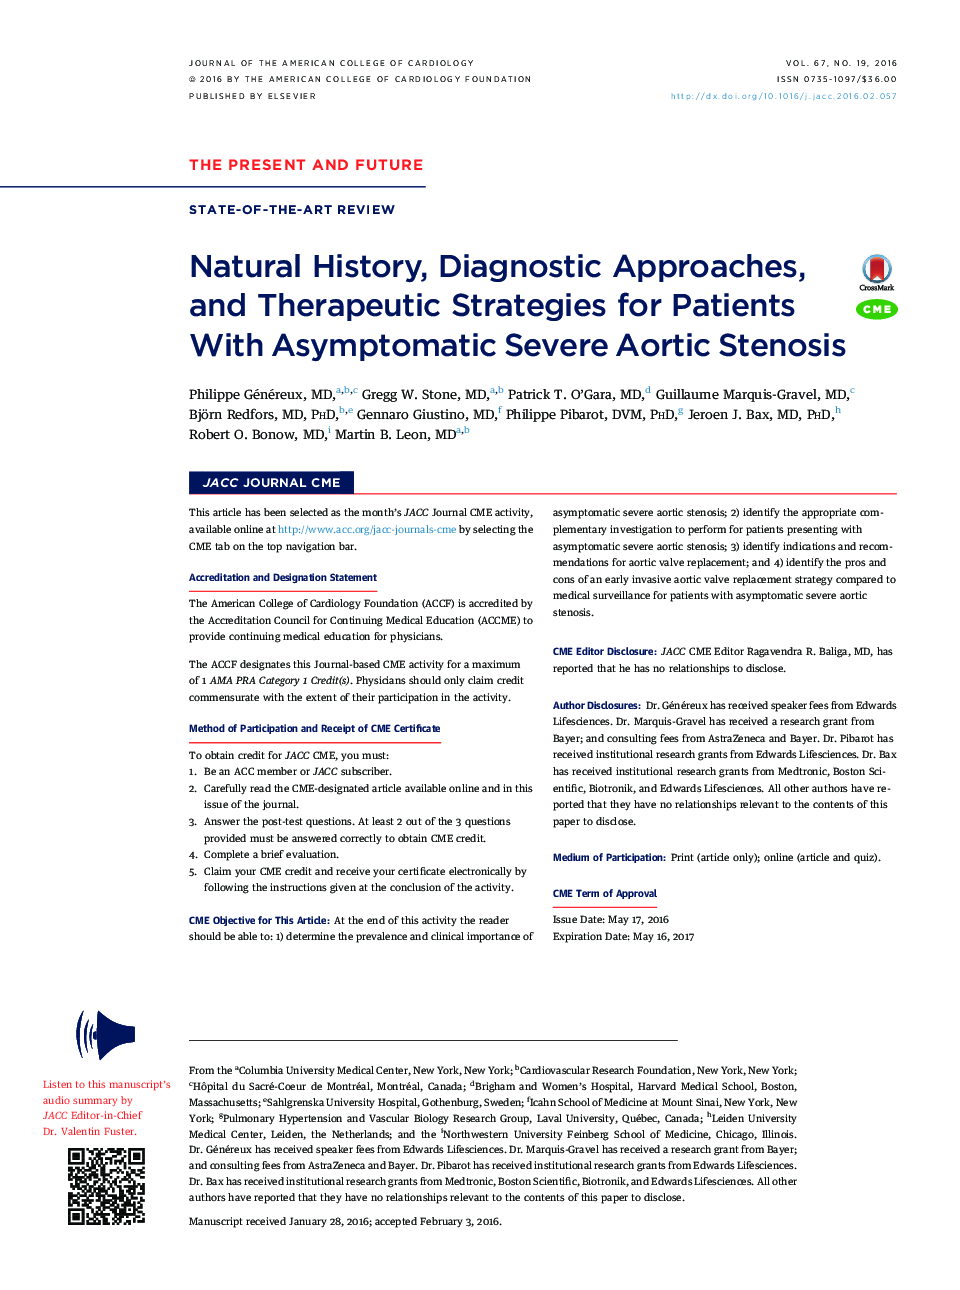 Natural History, Diagnostic Approaches, and Therapeutic Strategies for Patients With Asymptomatic Severe Aortic Stenosis